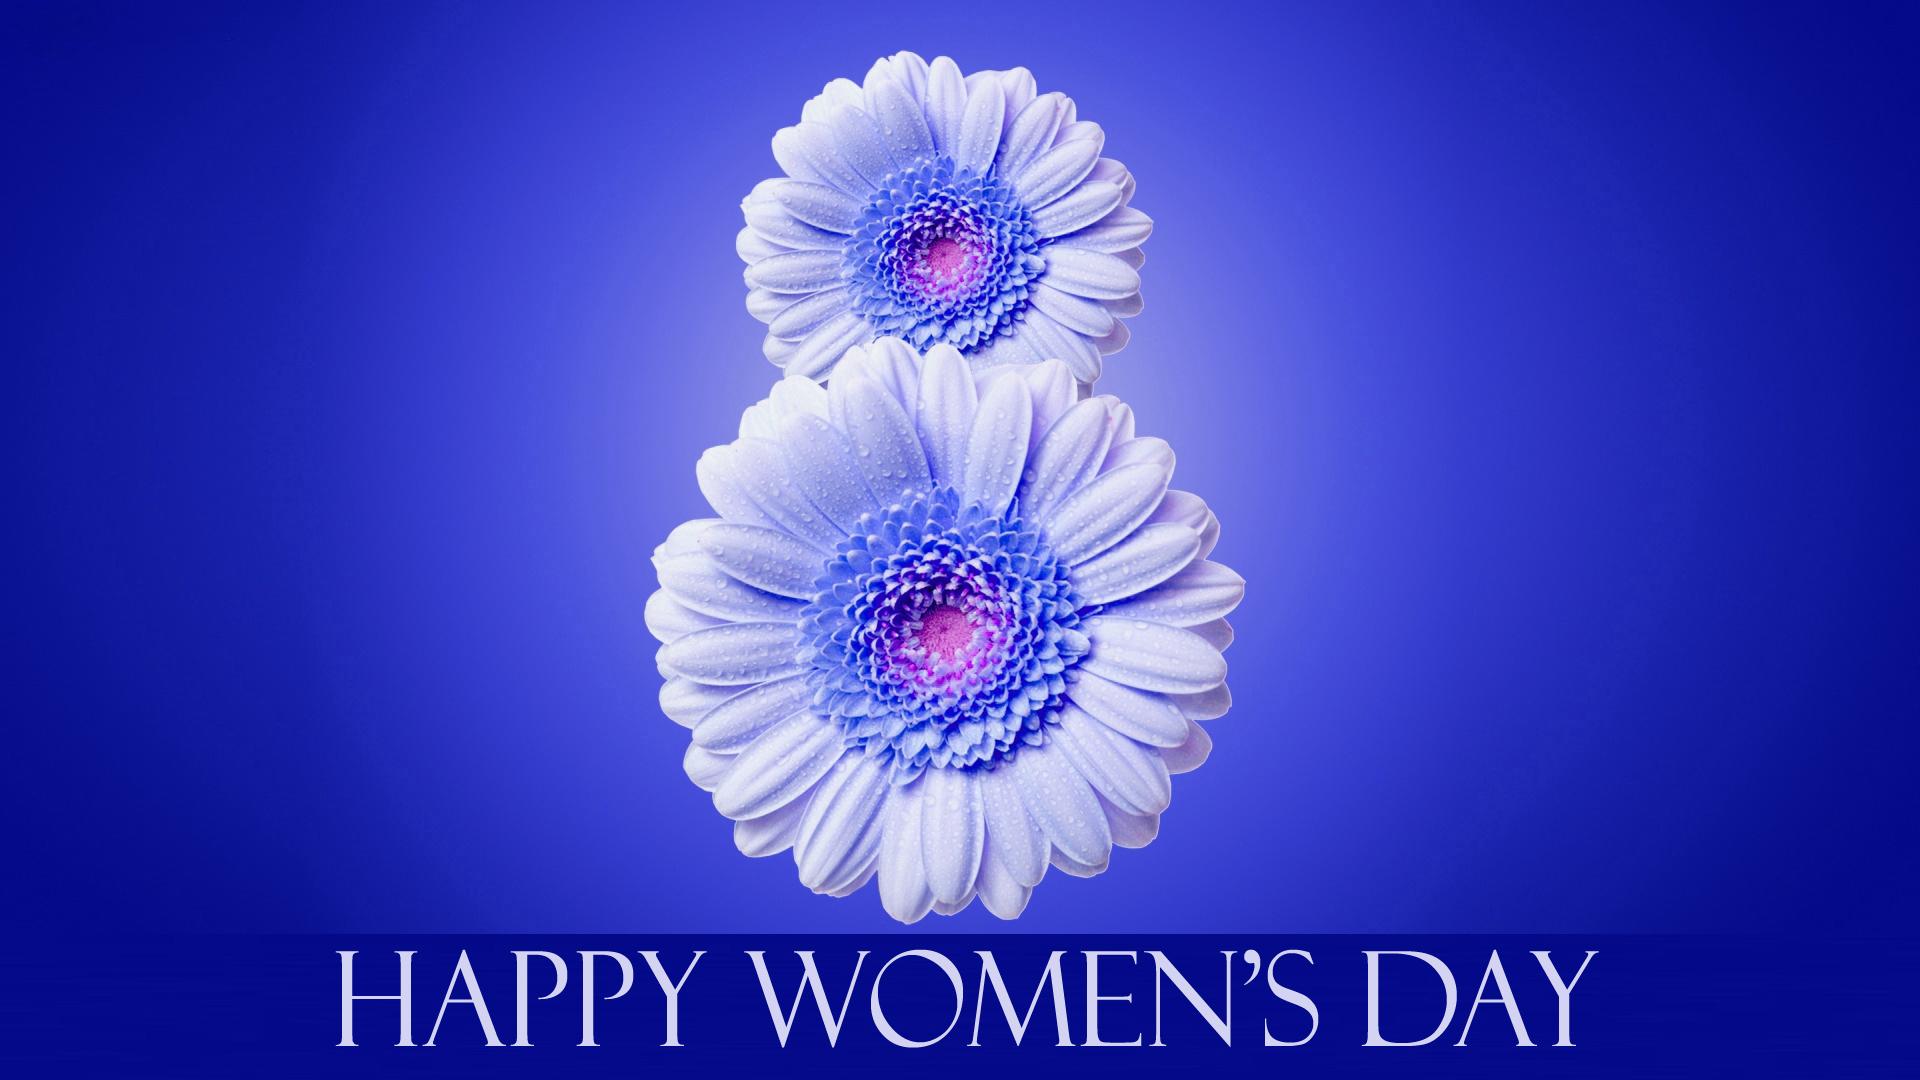 Wallpaper.wiki Happy Womens Day Lovely HD Wallpaper PIC WPB002284